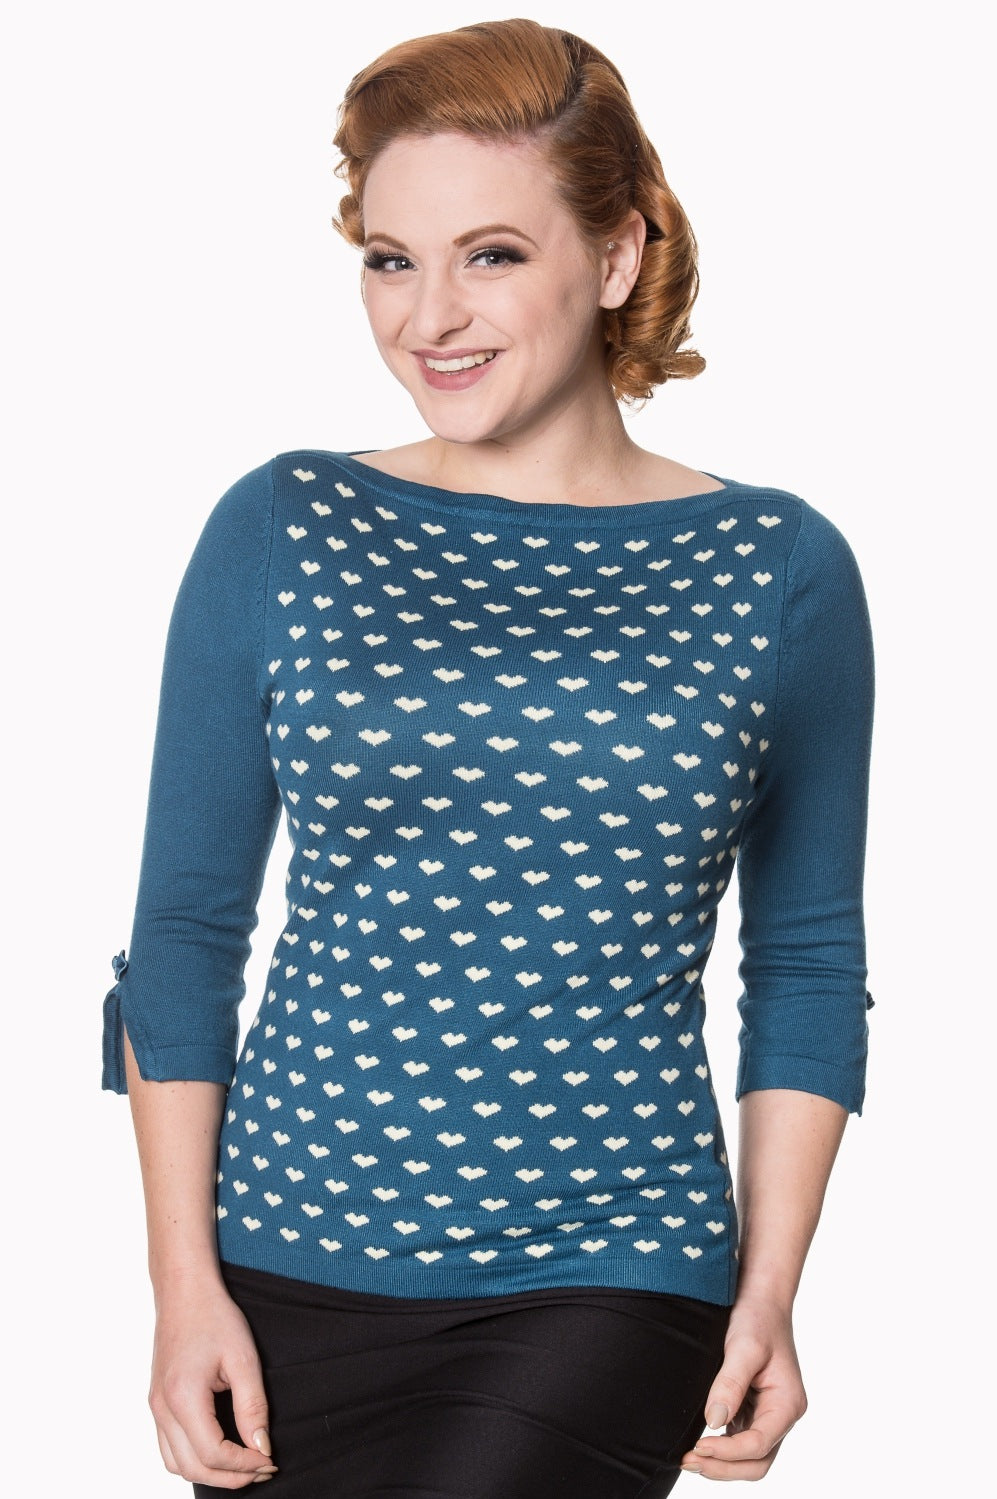 Rules of the Heart Jumper teal